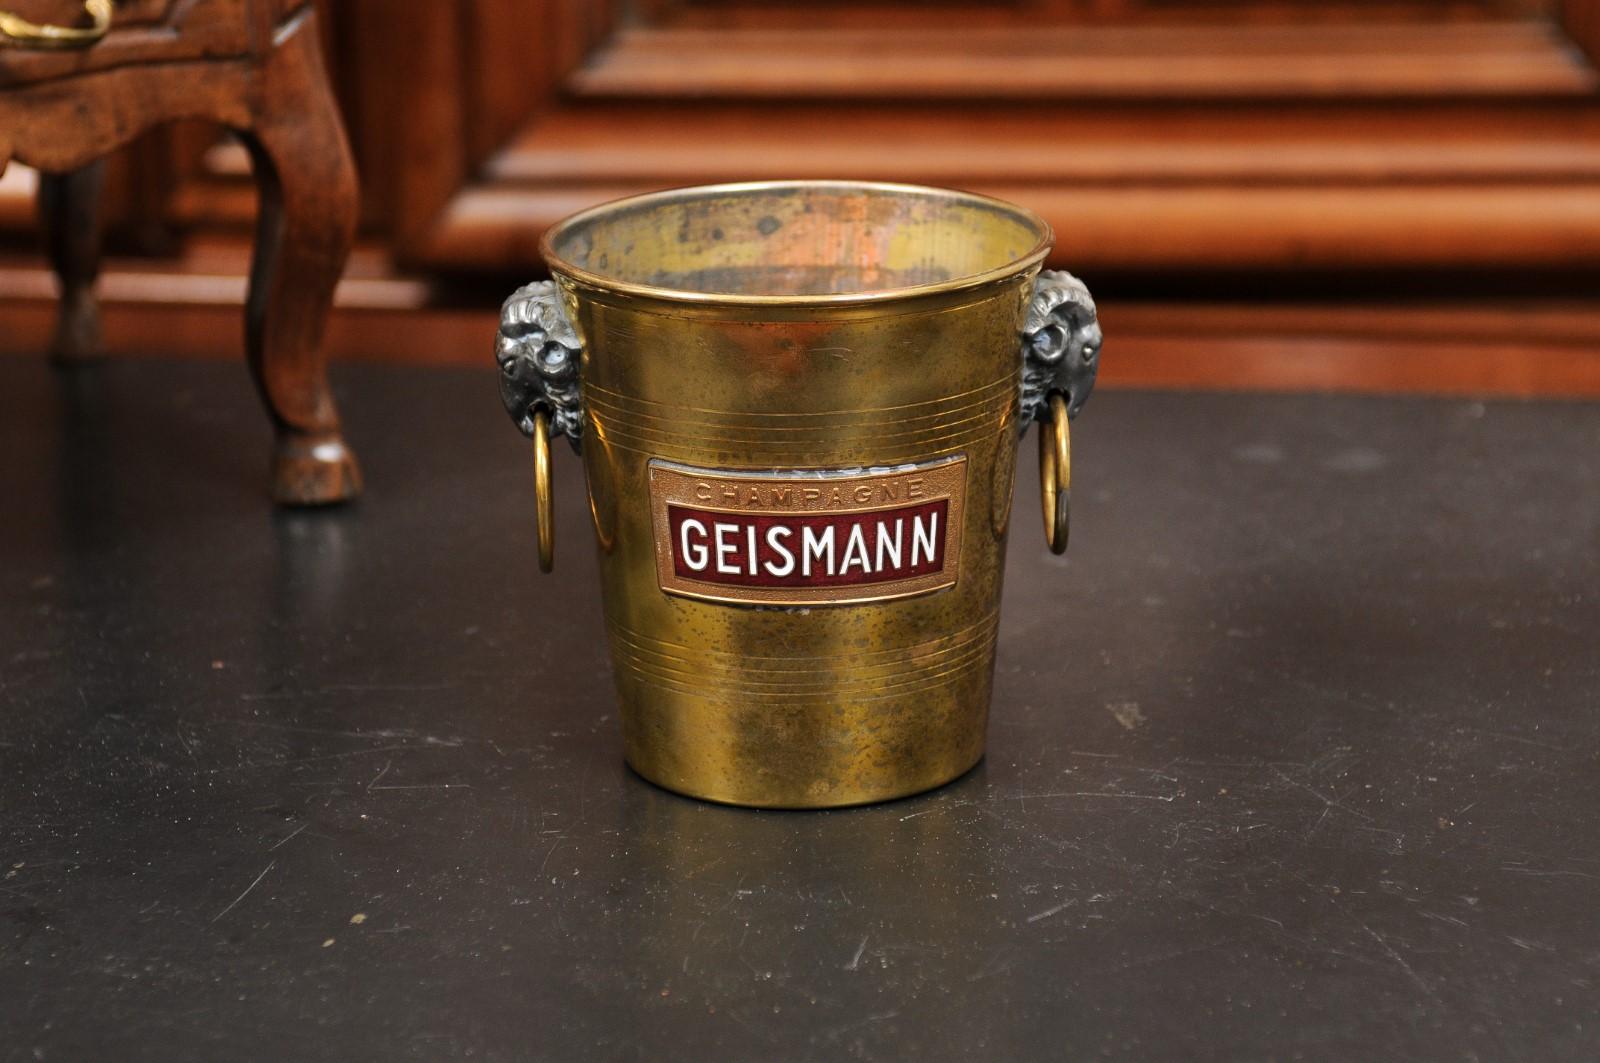 A small French brass champagne bucket from the 19th century, with Geismann label and rams' heads lateral handles. Created in France during the 19th century, this brass champagne bucket features a circular tapering body accented with lateral handles